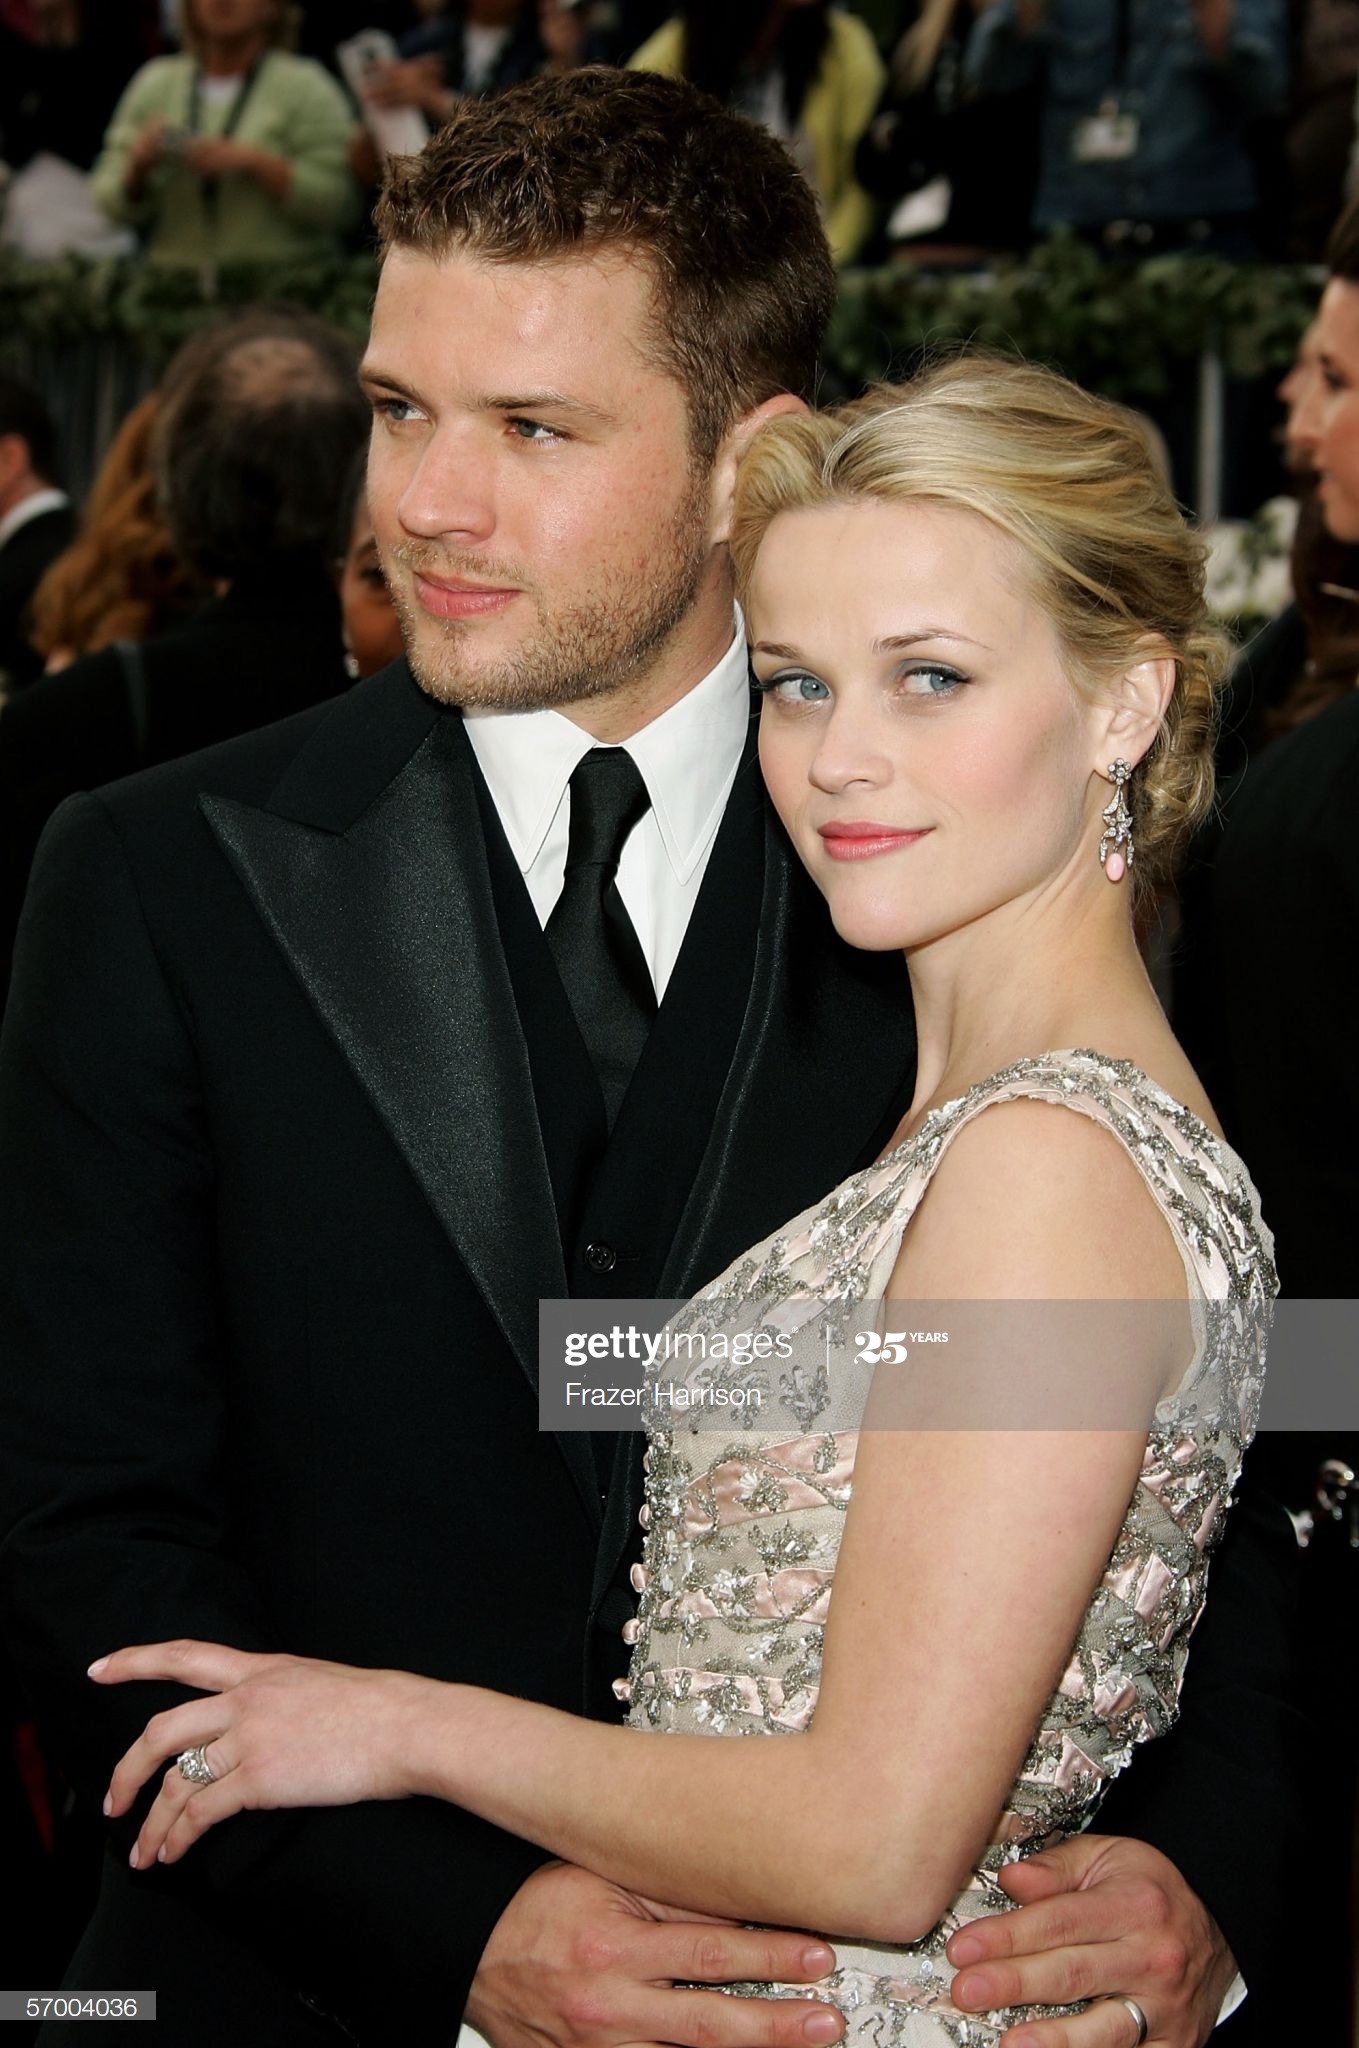 Reese Witherspoon and Ryan Phillippe The actors’ marriage lasted for about 5 years. Reese and Ryan have 2 kids together, Ava and Deacon, and are getting along quite well nowadays. It seems that the couple has figured out how to stay on good terms and continues to raise their kids in peace and harmony.